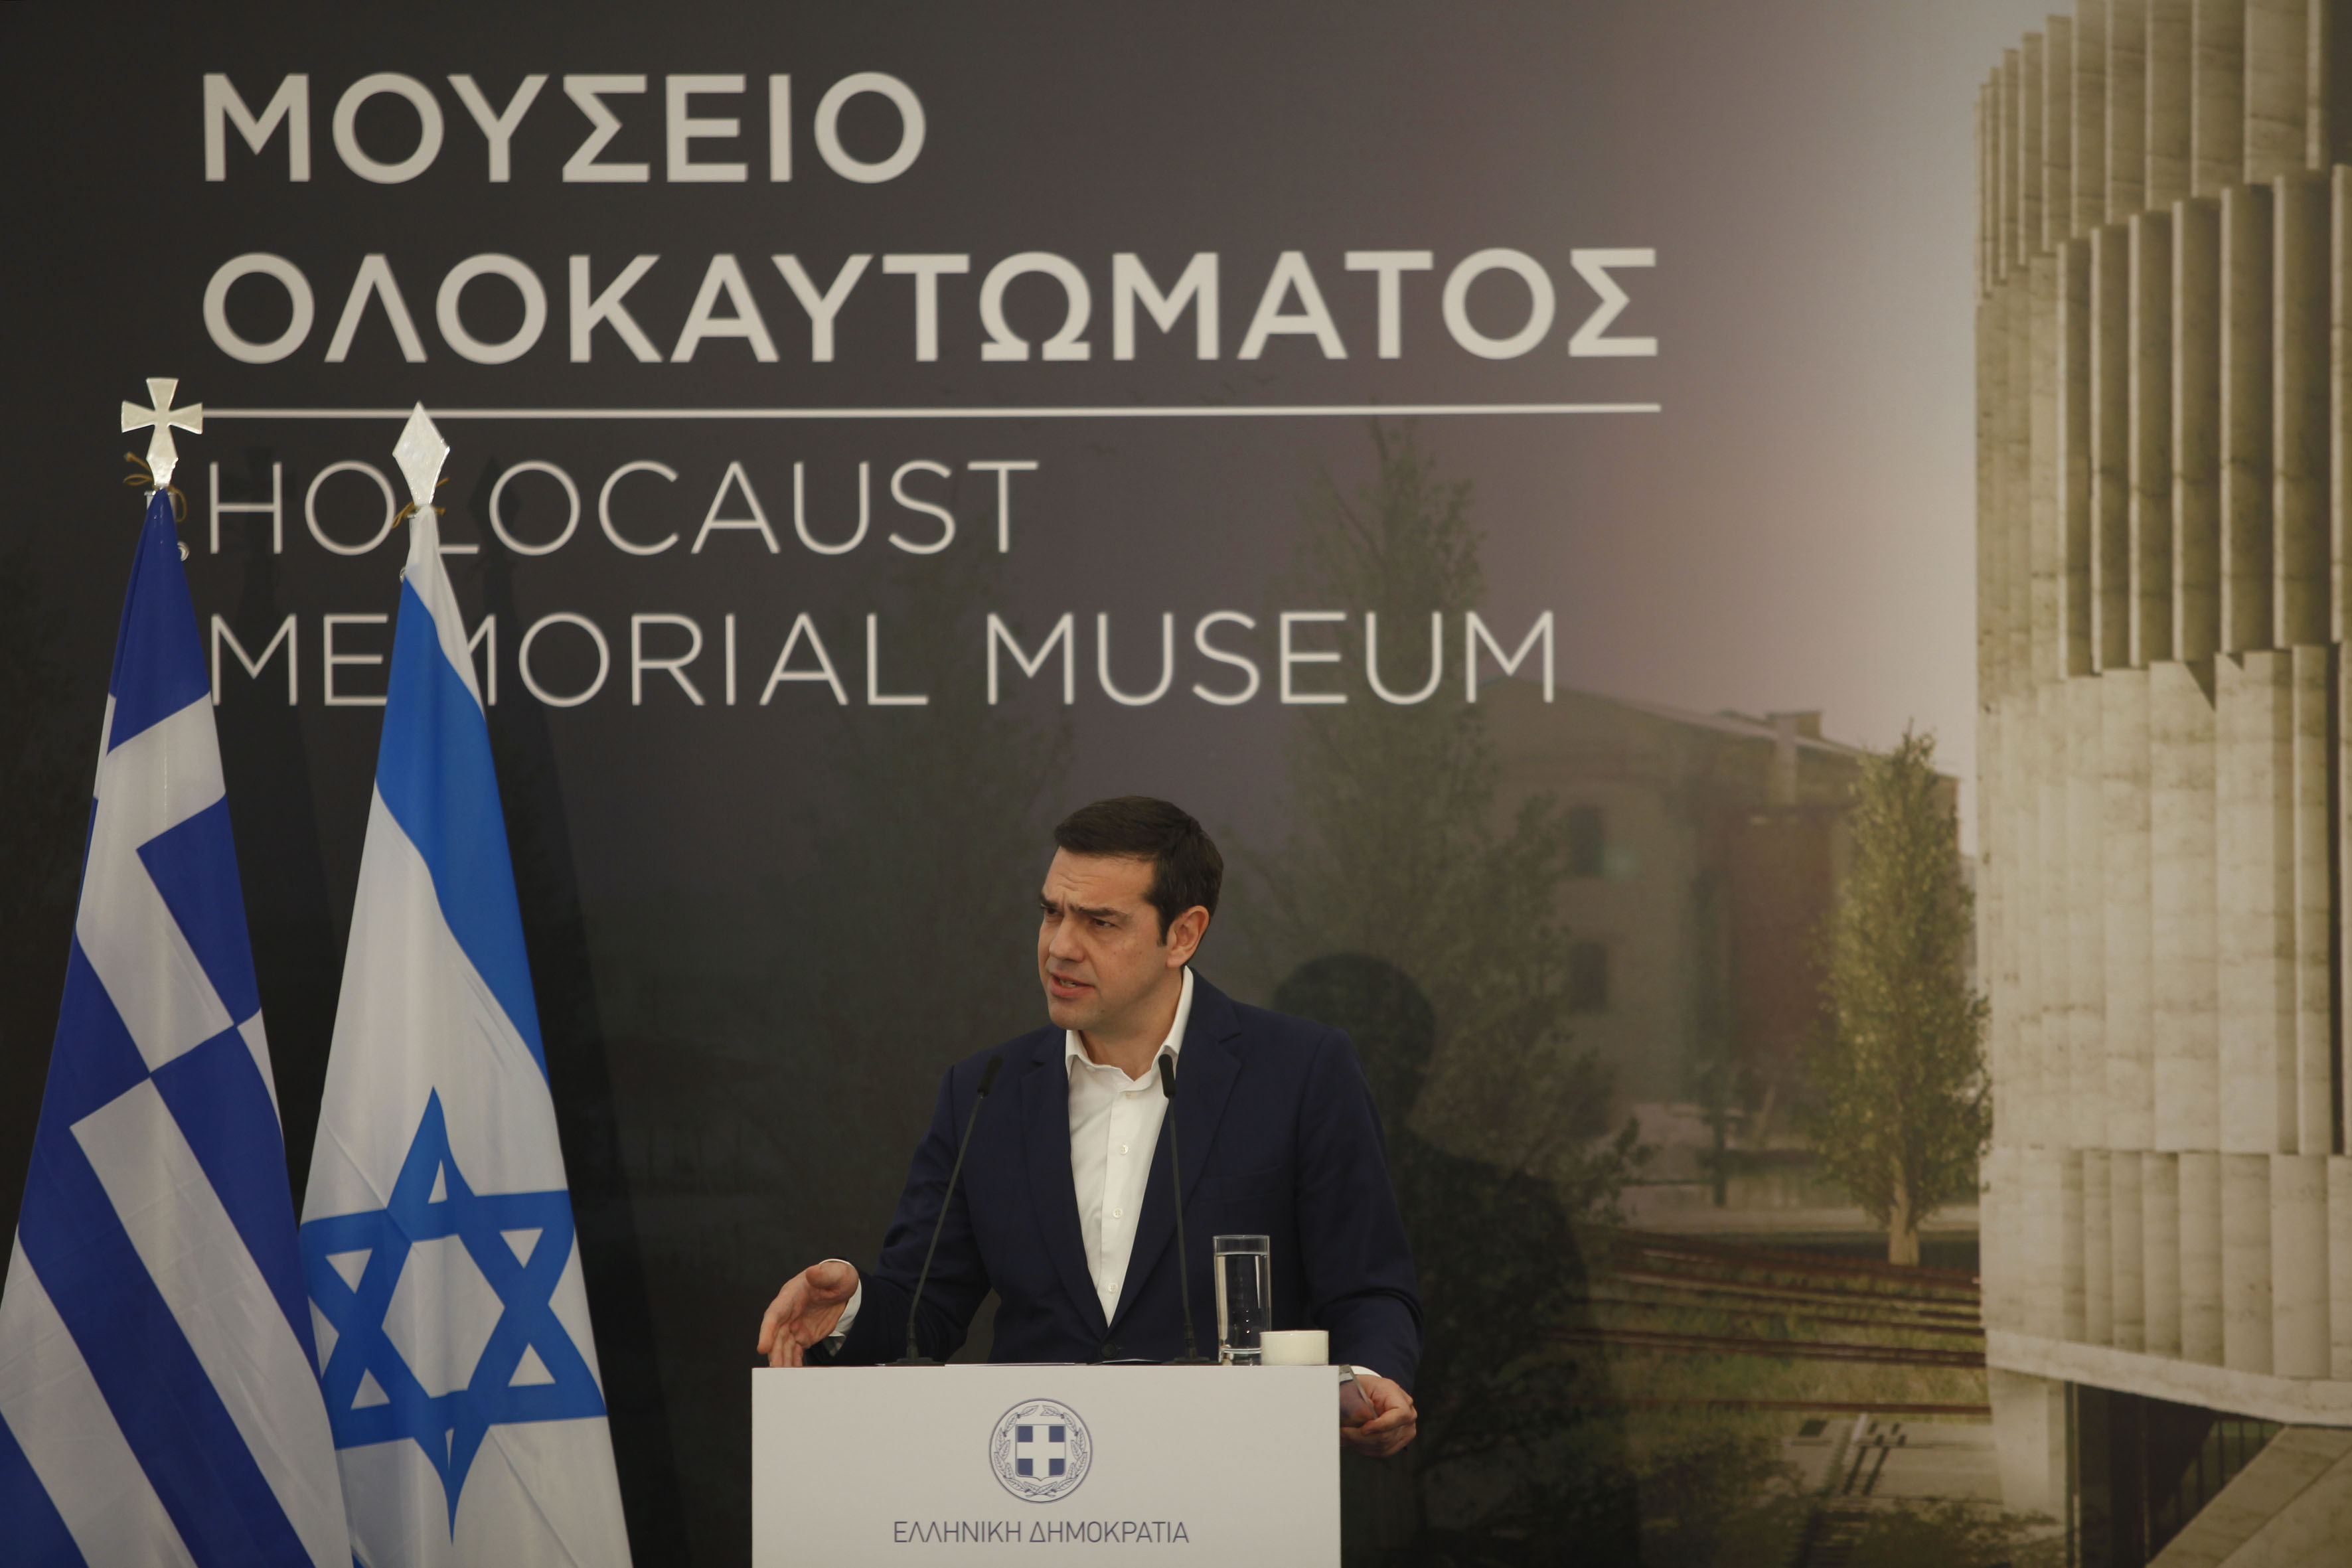 Message of remembrance, peace at Thessaloniki’s Holocaust Museum groundbrealing